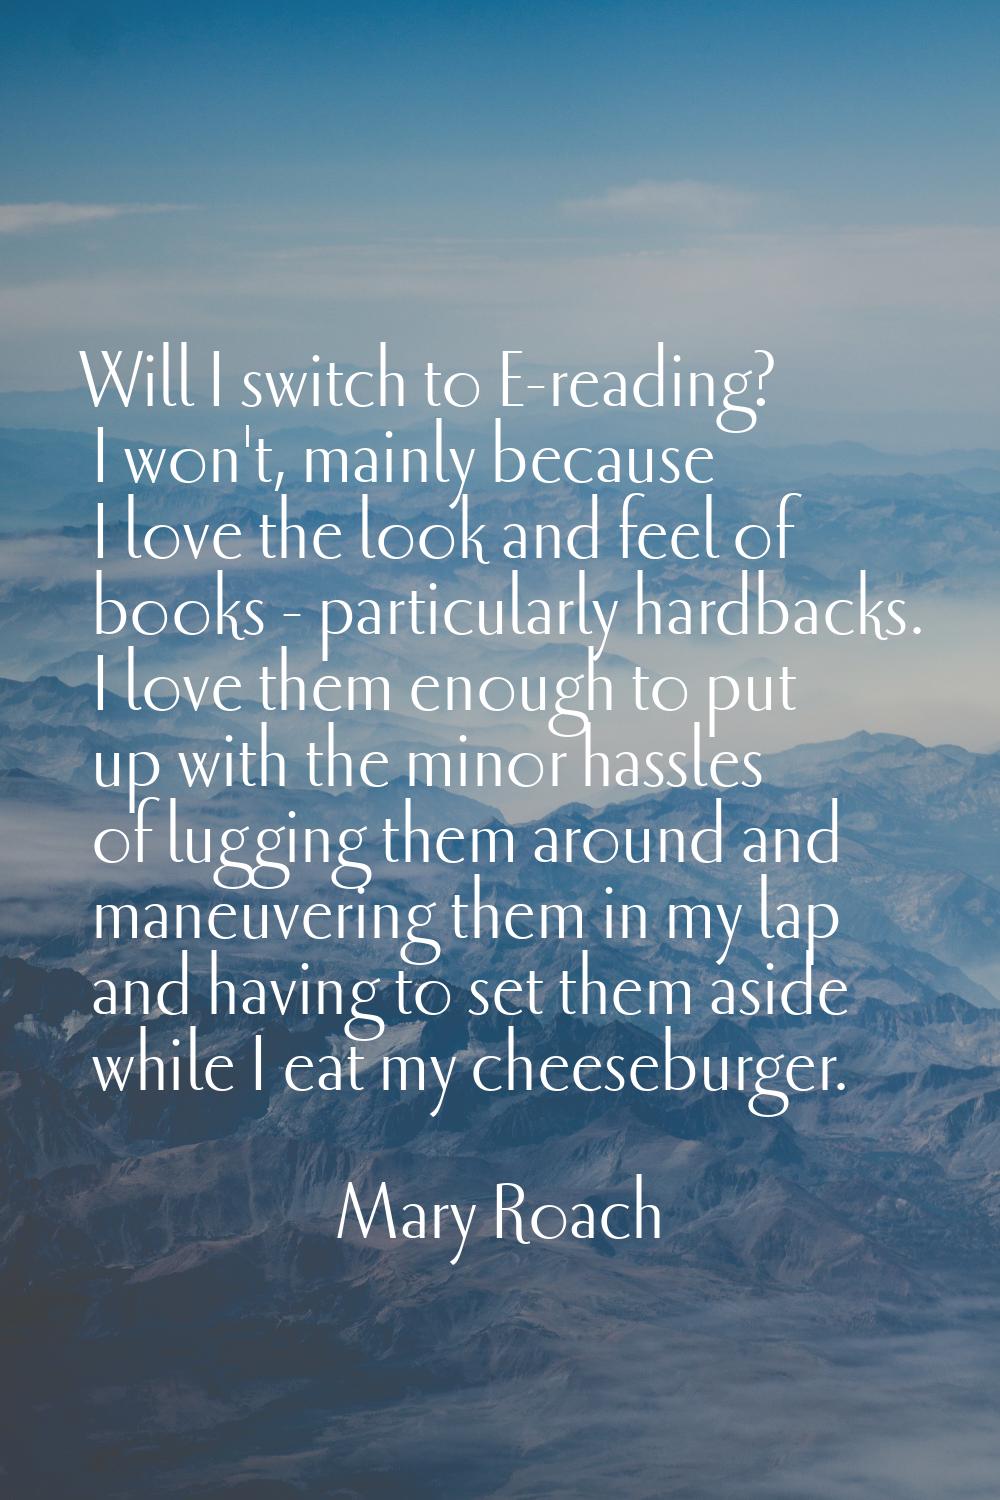 Will I switch to E-reading? I won't, mainly because I love the look and feel of books - particularl